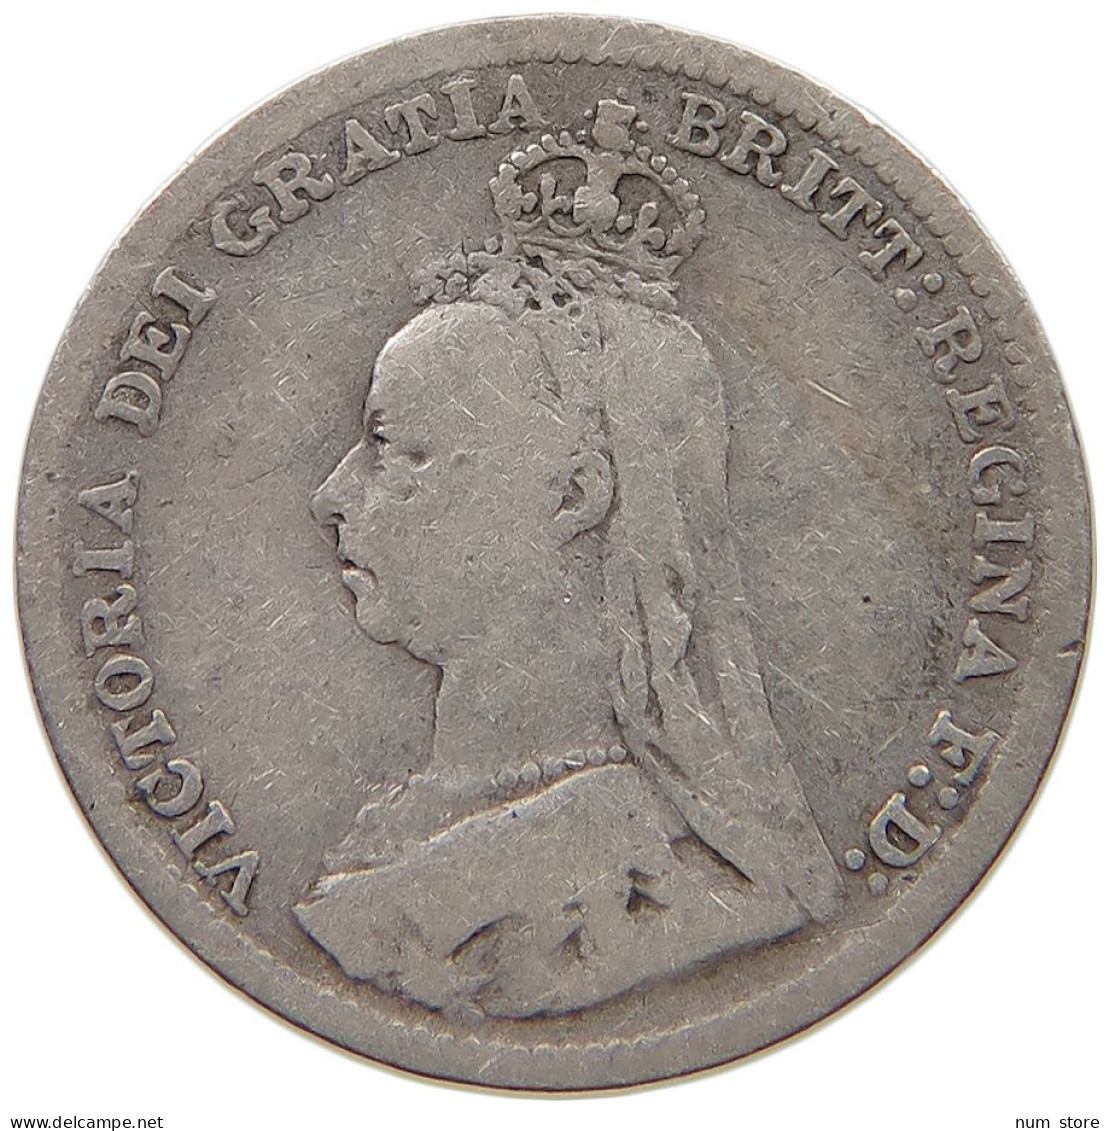 GREAT BRITAIN 3 PENCE 1891 #c019 0113 - F. 3 Pence